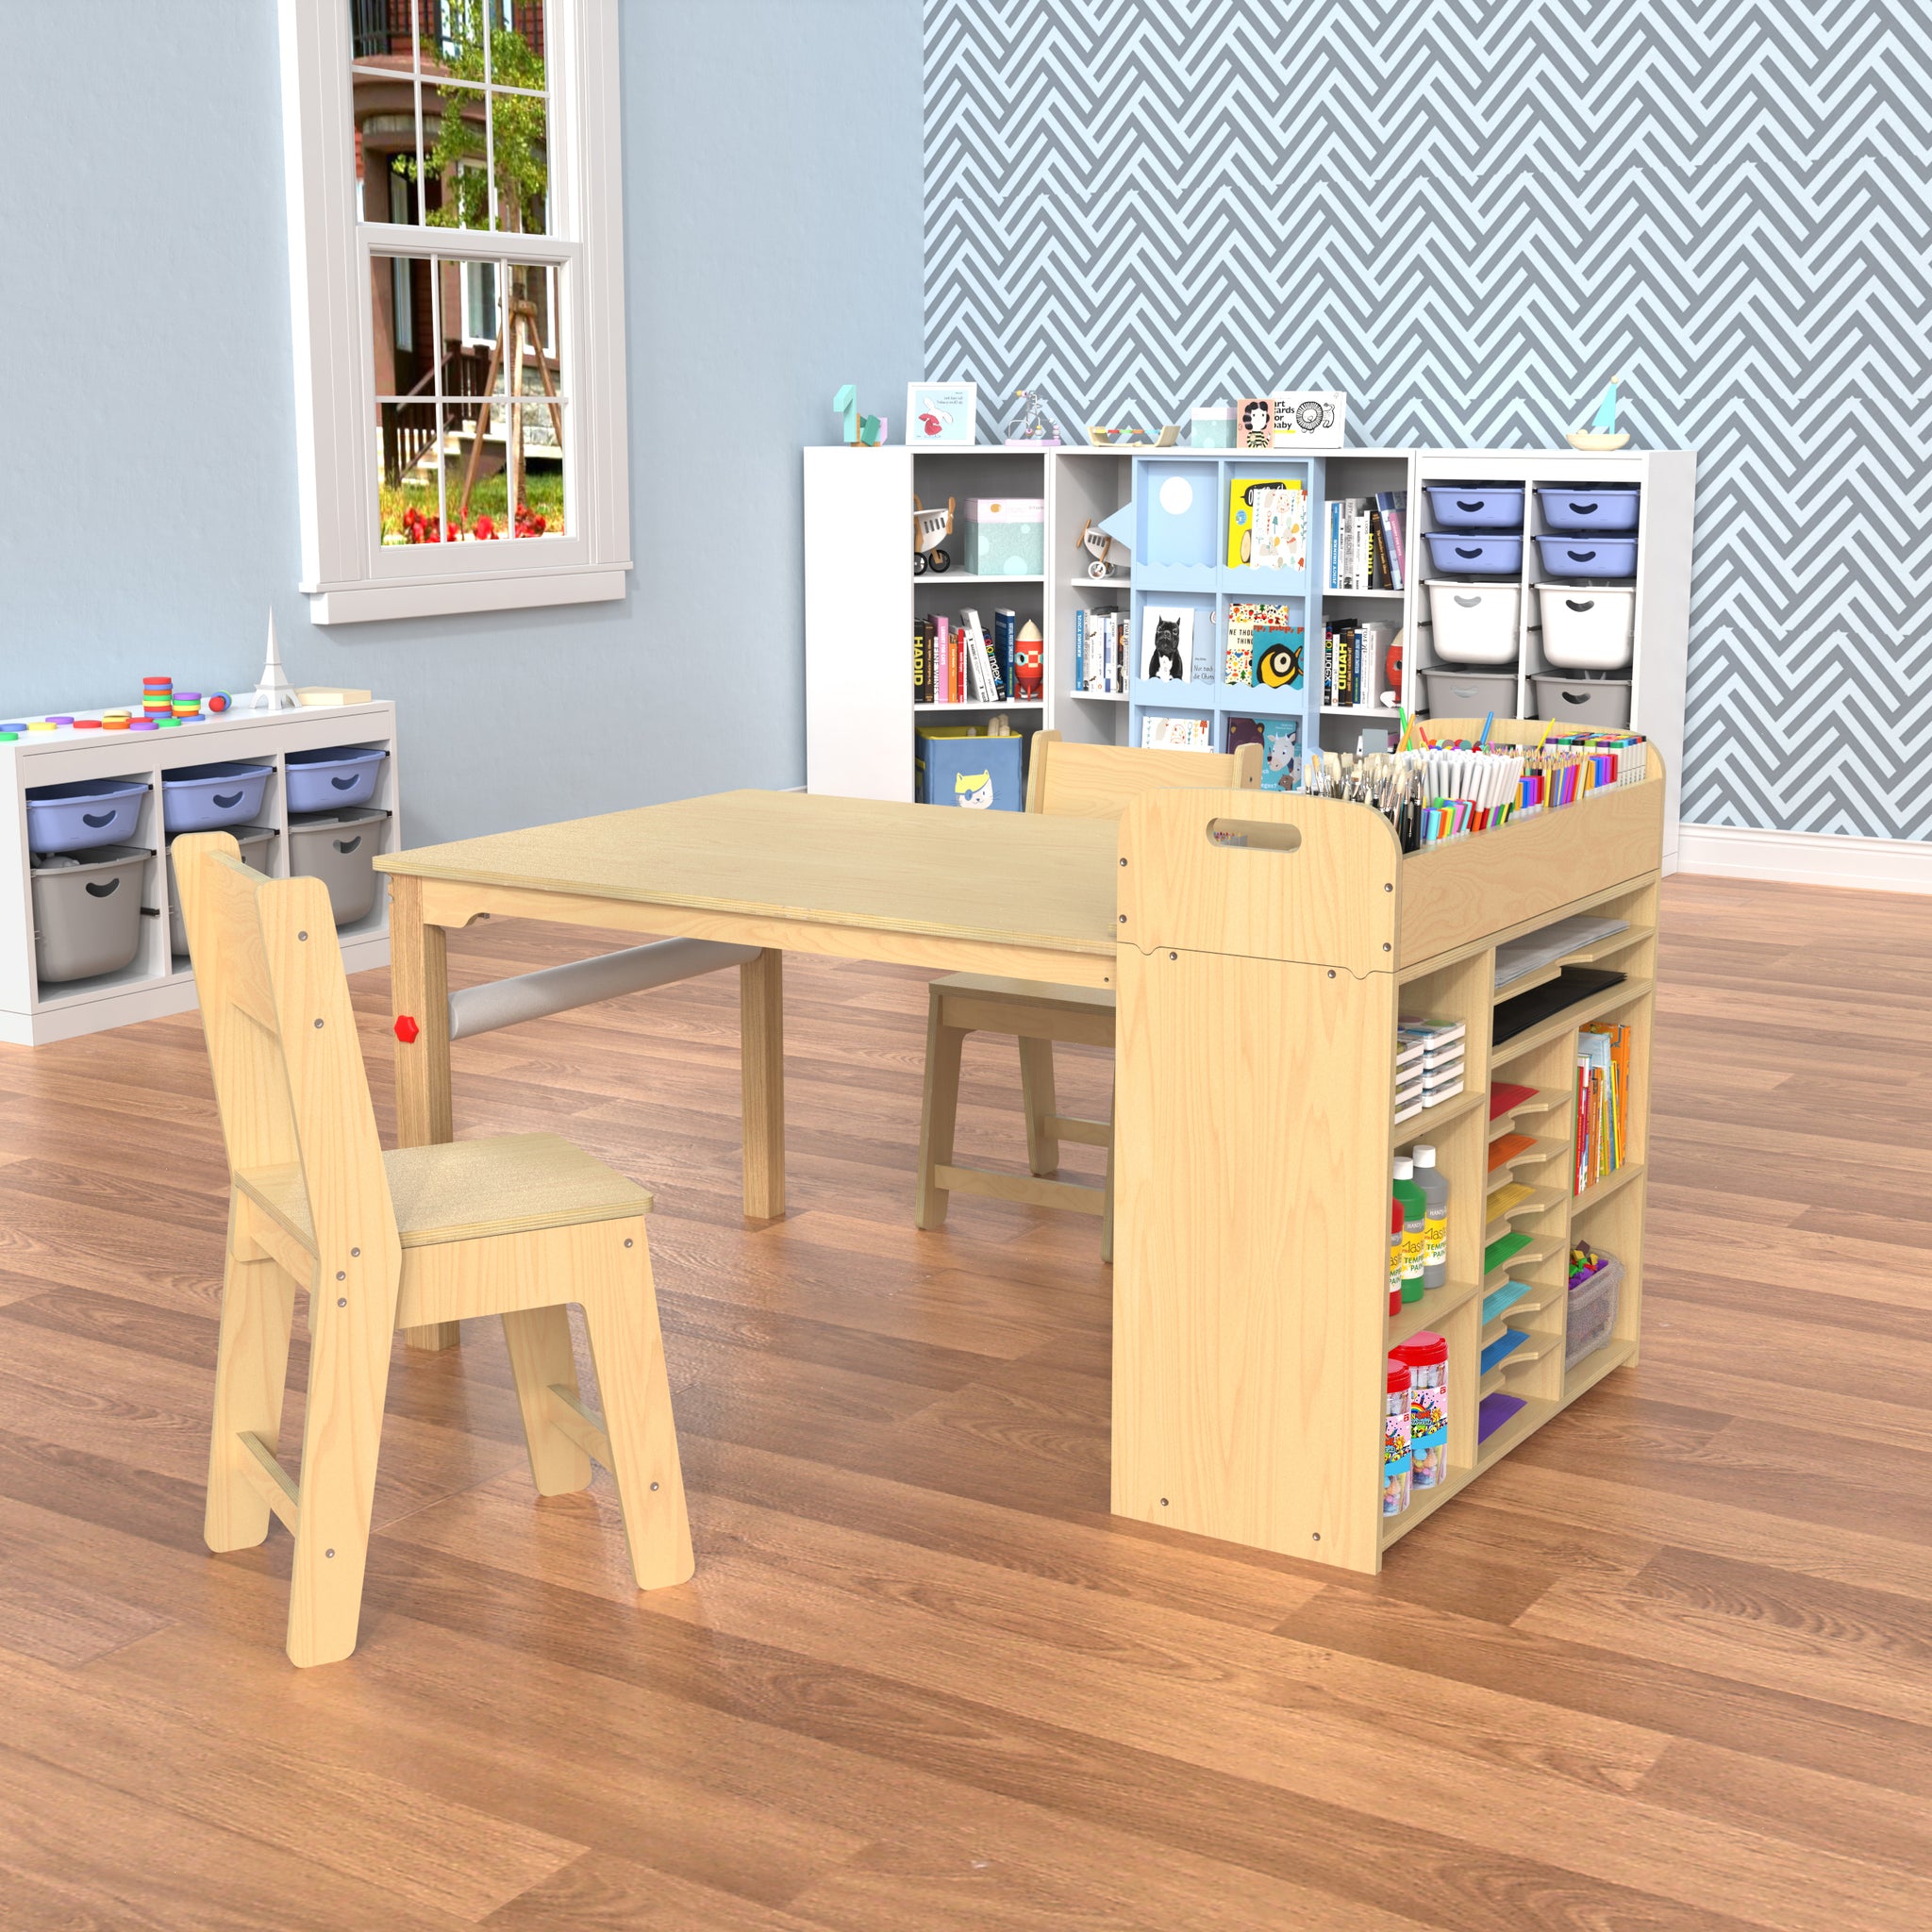 Kids Arts and Crafts Table and Chair Set